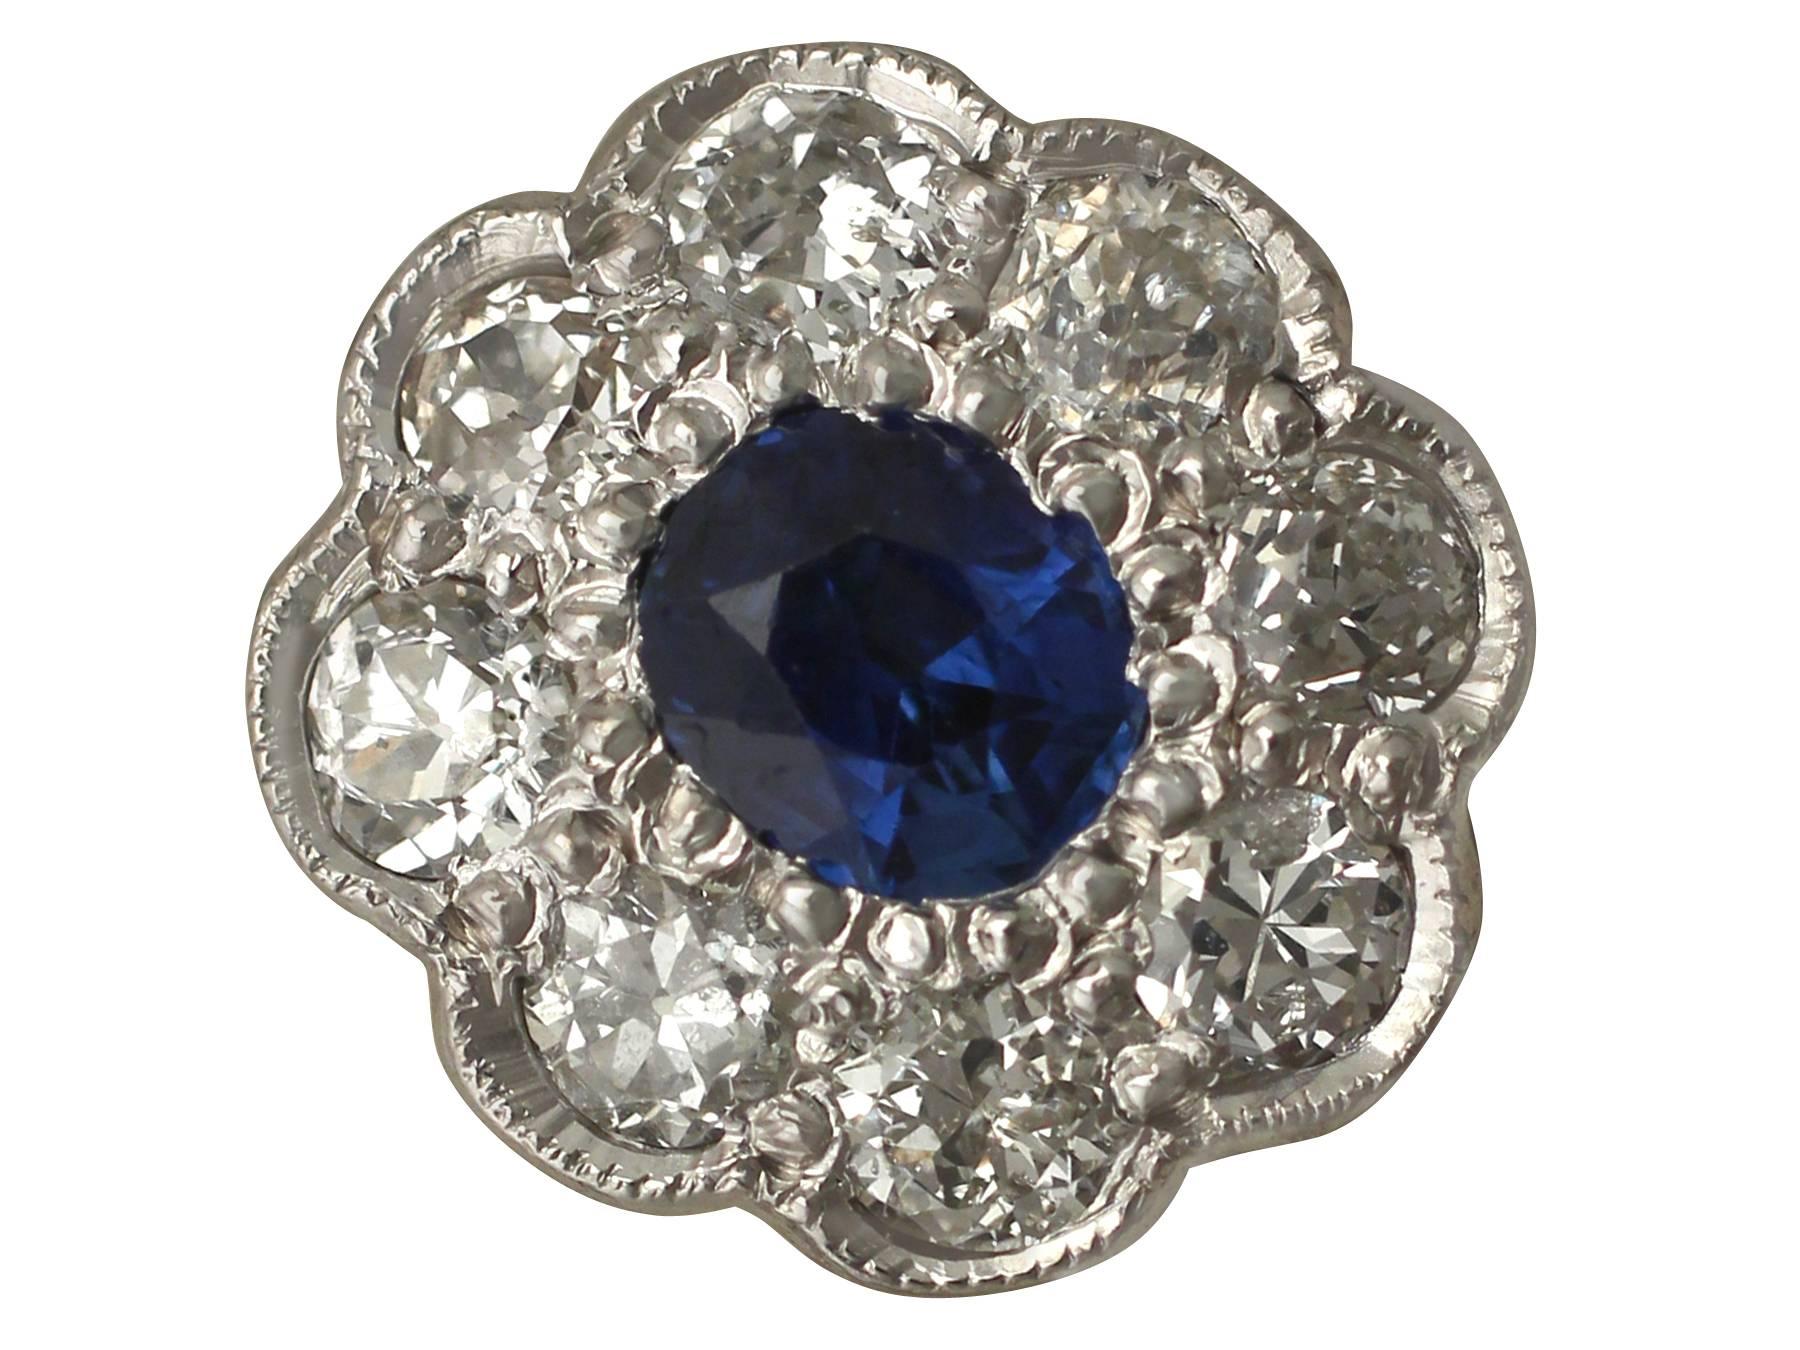 A fine and impressive pair of 0.92 Carat blue sapphire and 1.02 Carat diamond, 18 karat white gold cluster style stud earrings; part of our diverse antique jewelry collections

These fine and impressive sapphire and diamond earrings have been